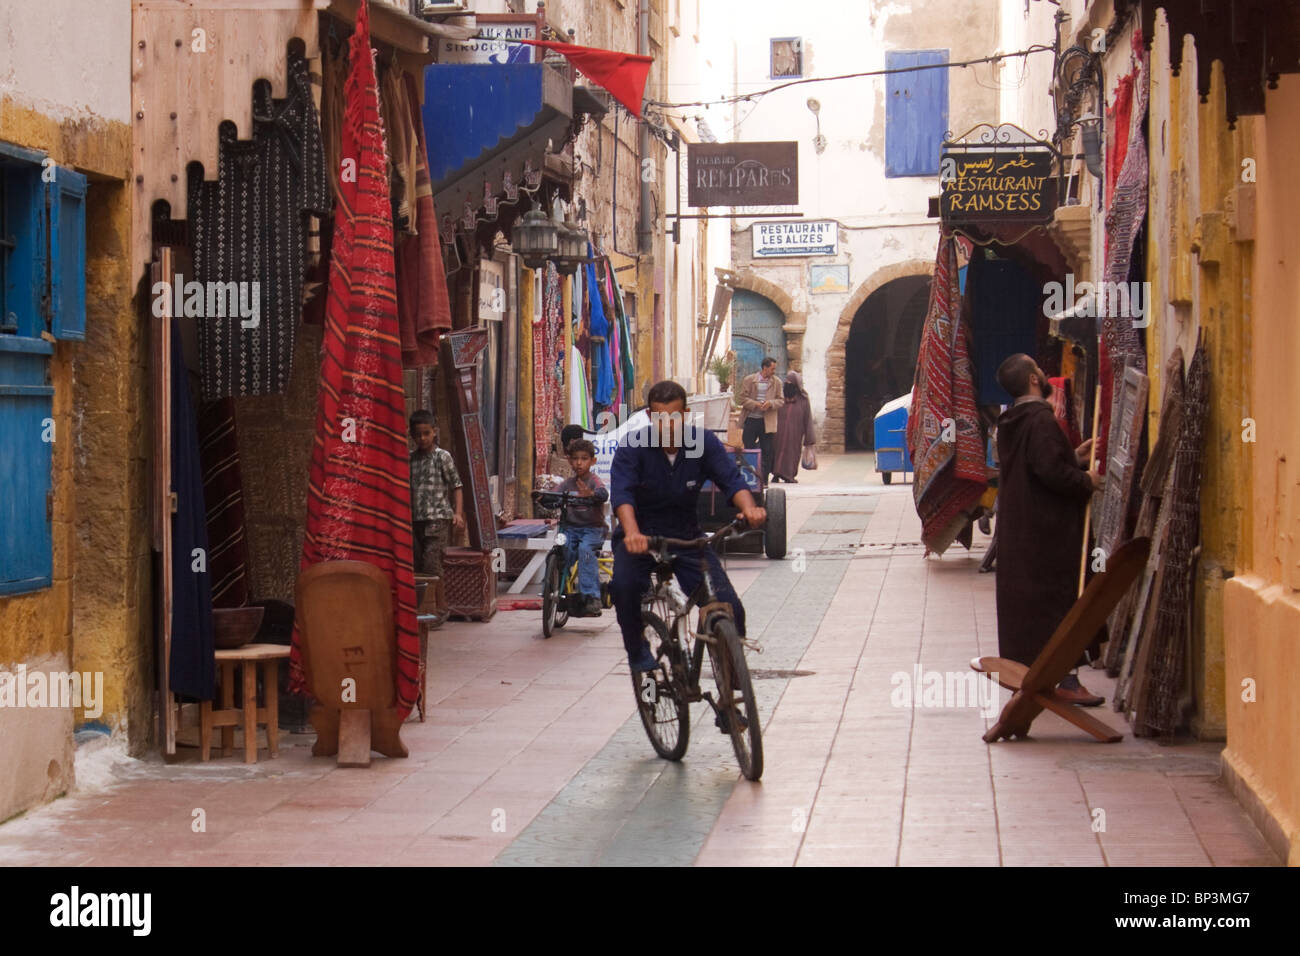 Man on bicycle in Souks in Essaouira Stock Photo